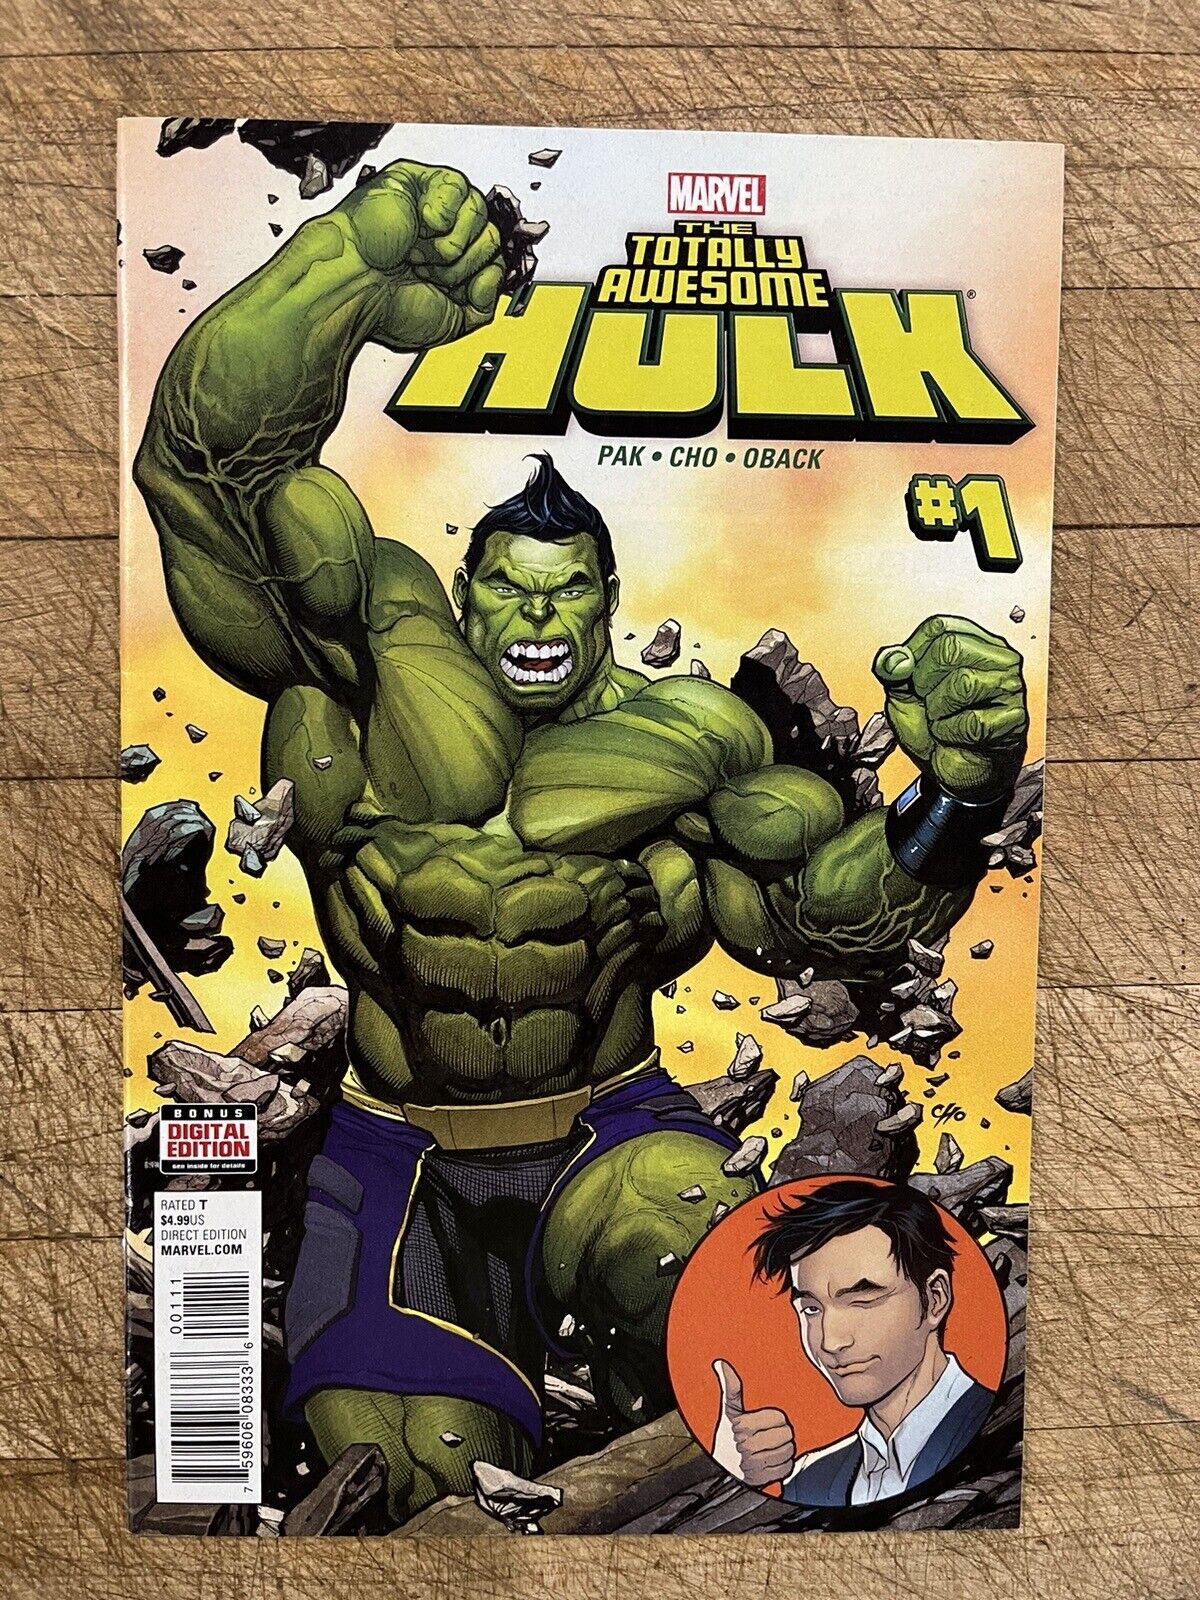 Totally Awesome Hulk 1 1st app Amadeus Cho as Hulk, Direct Edition